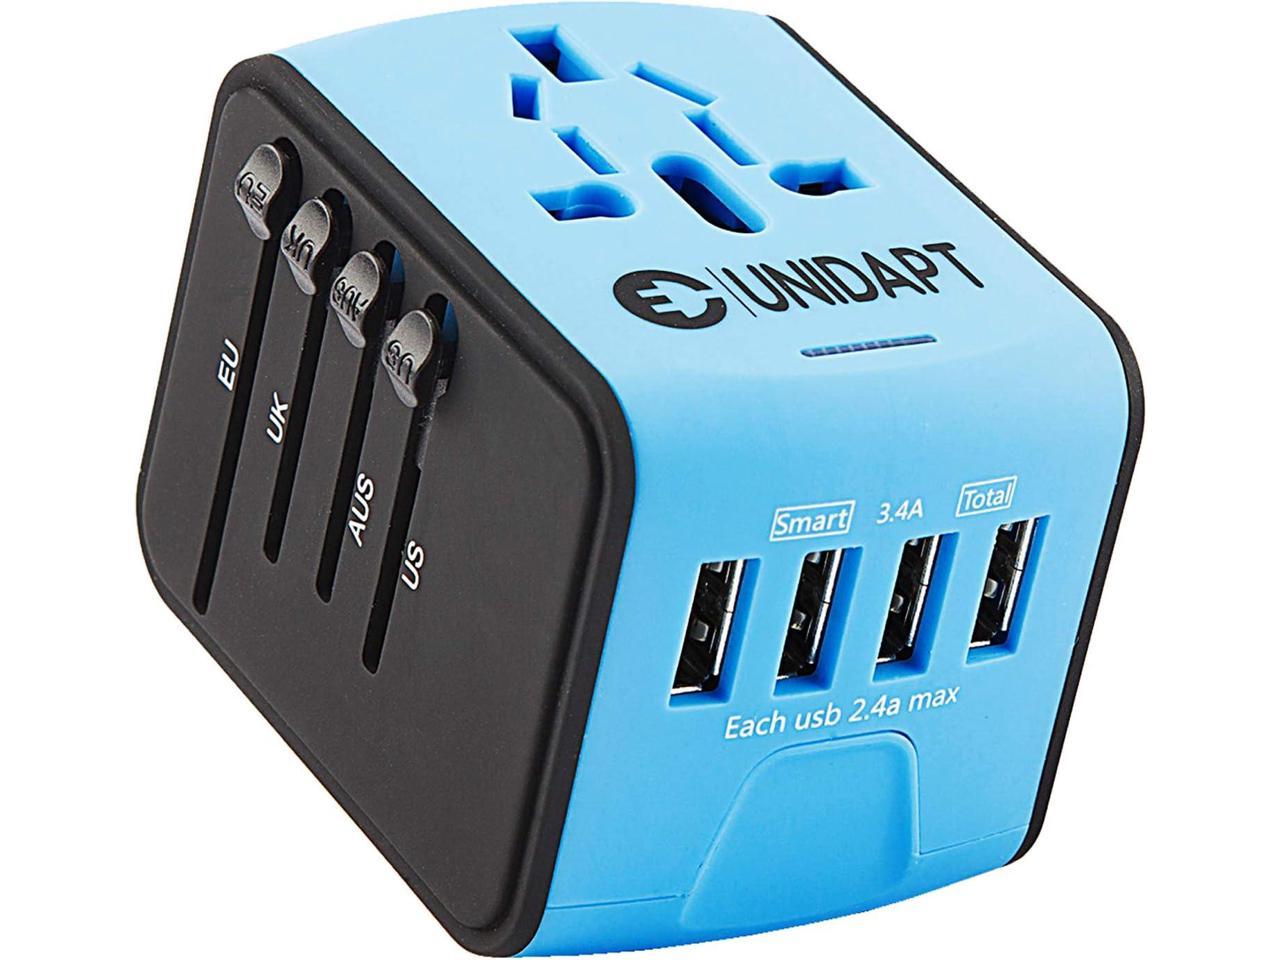 Europe & Asia US Good voice International Travel Power Adapter with 2.4A Dual USB Charger for UK Built-in Spare Fuse,Great for iPhone/iPad/Samsung/Smartphone BLUE Green AU 